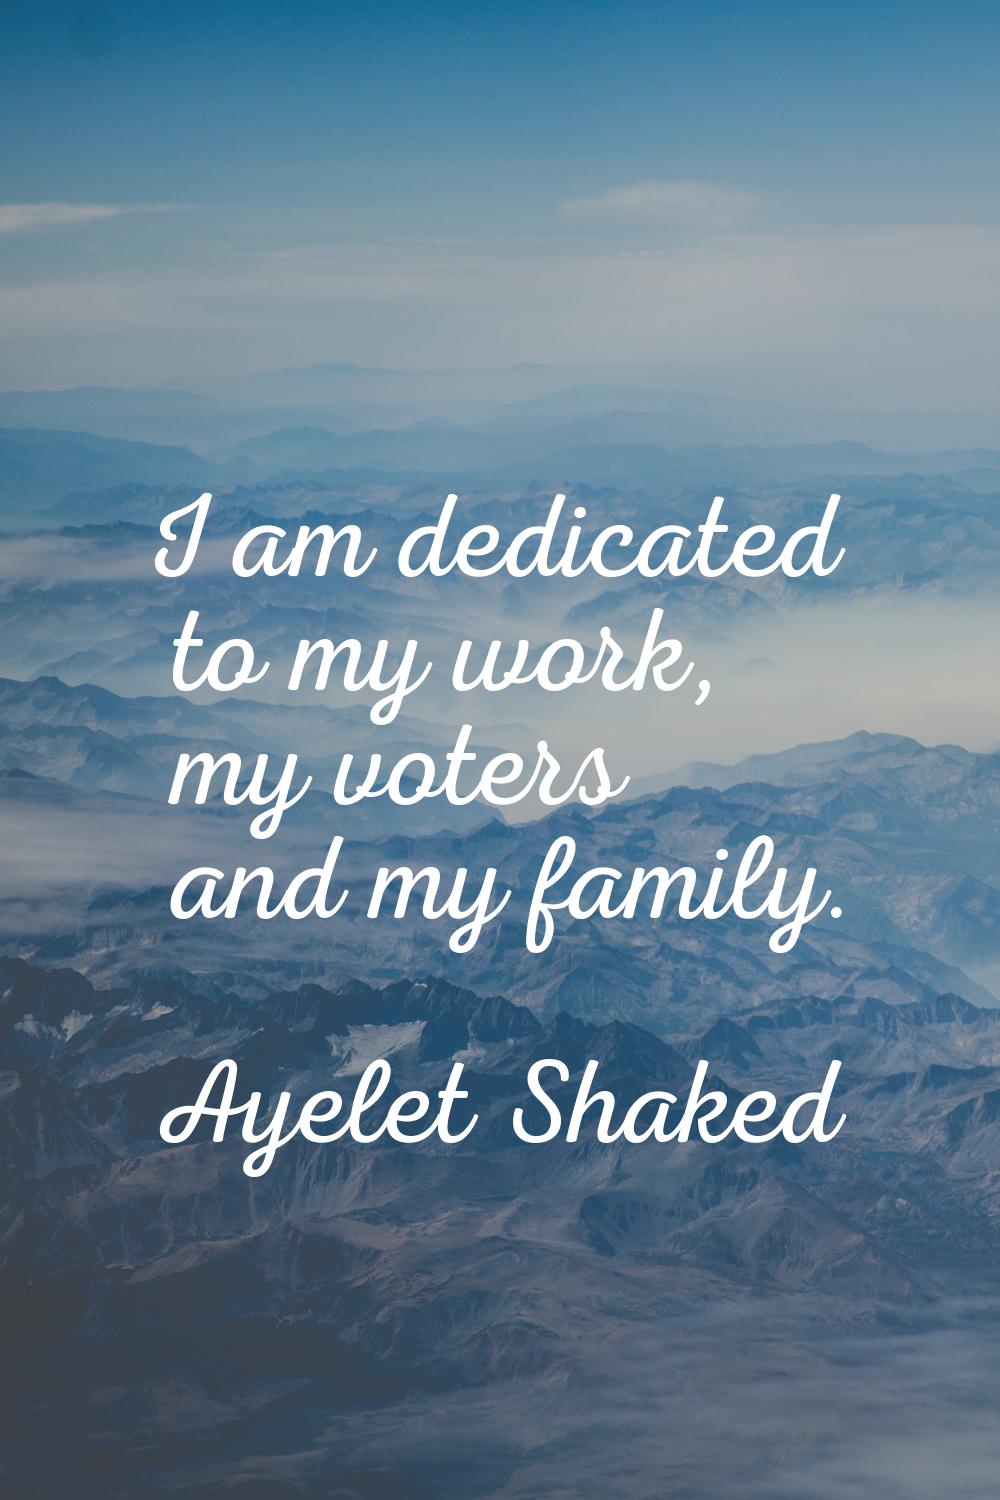 I am dedicated to my work, my voters and my family.